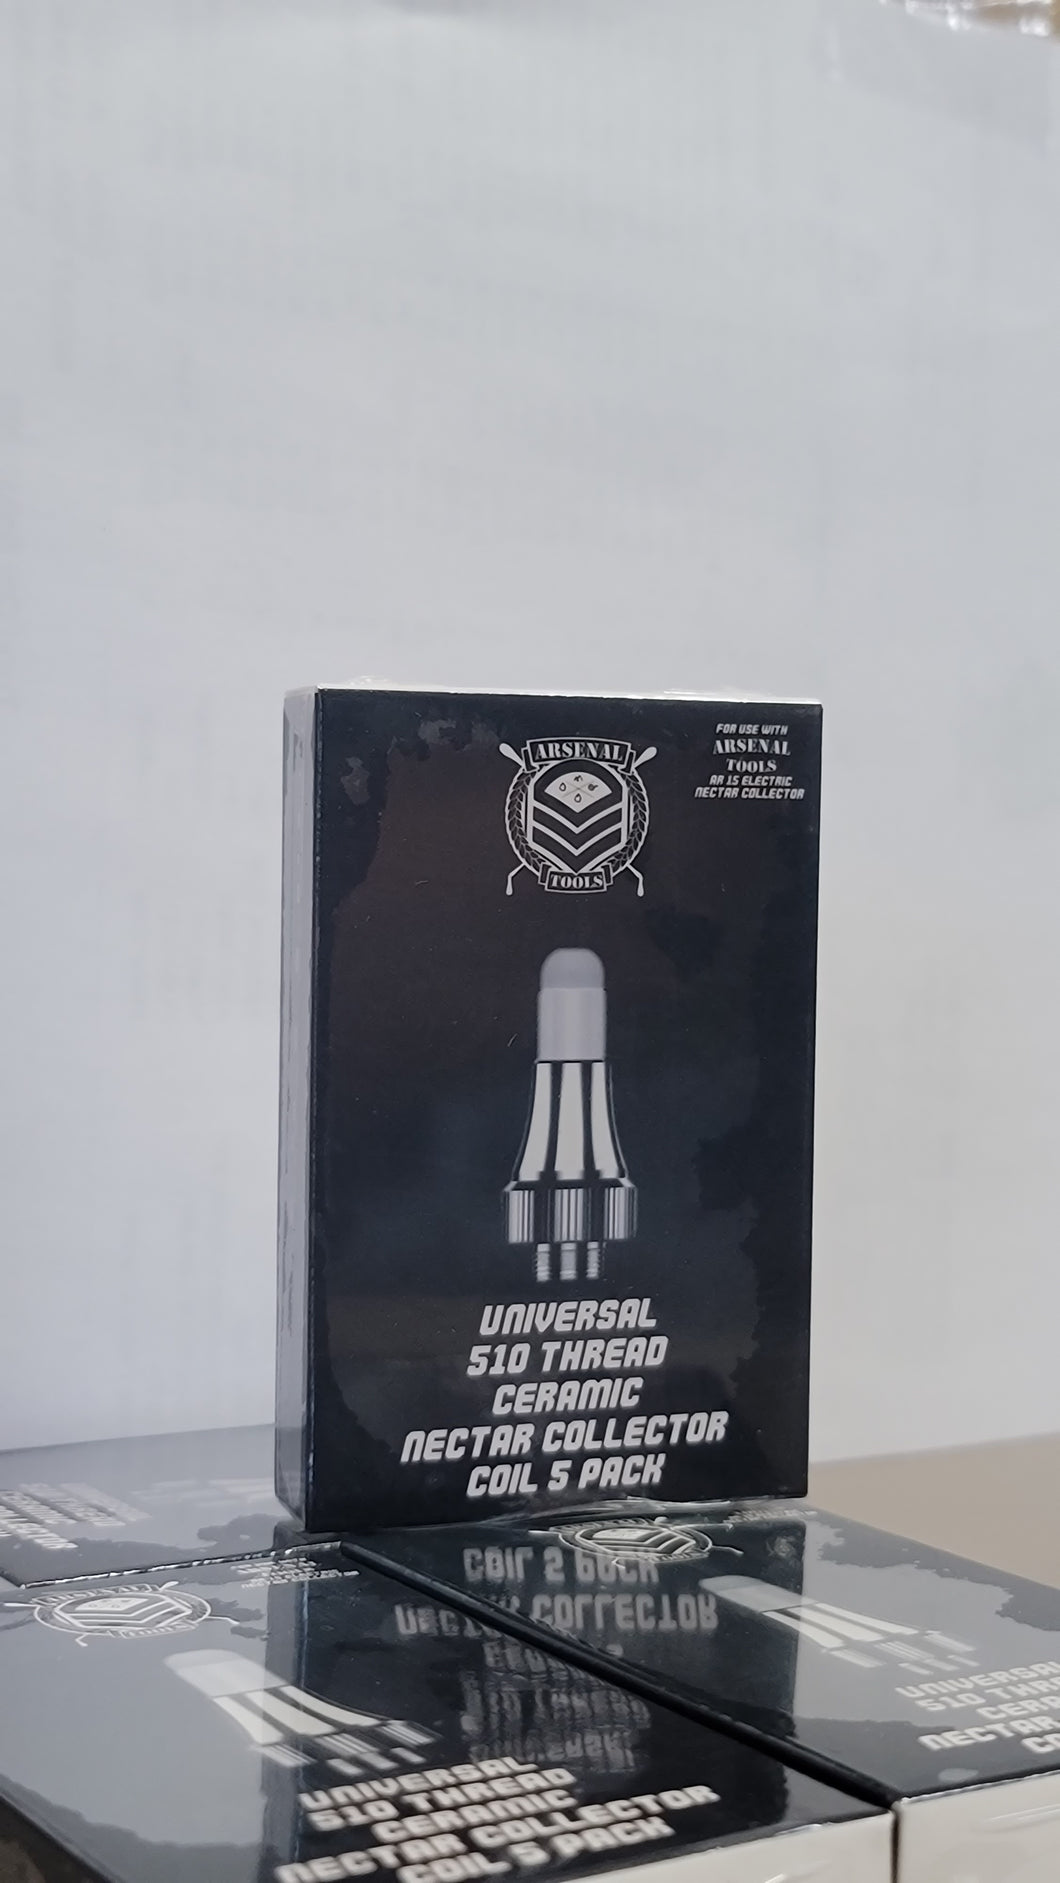 Nectar Collector Coil (5) packs